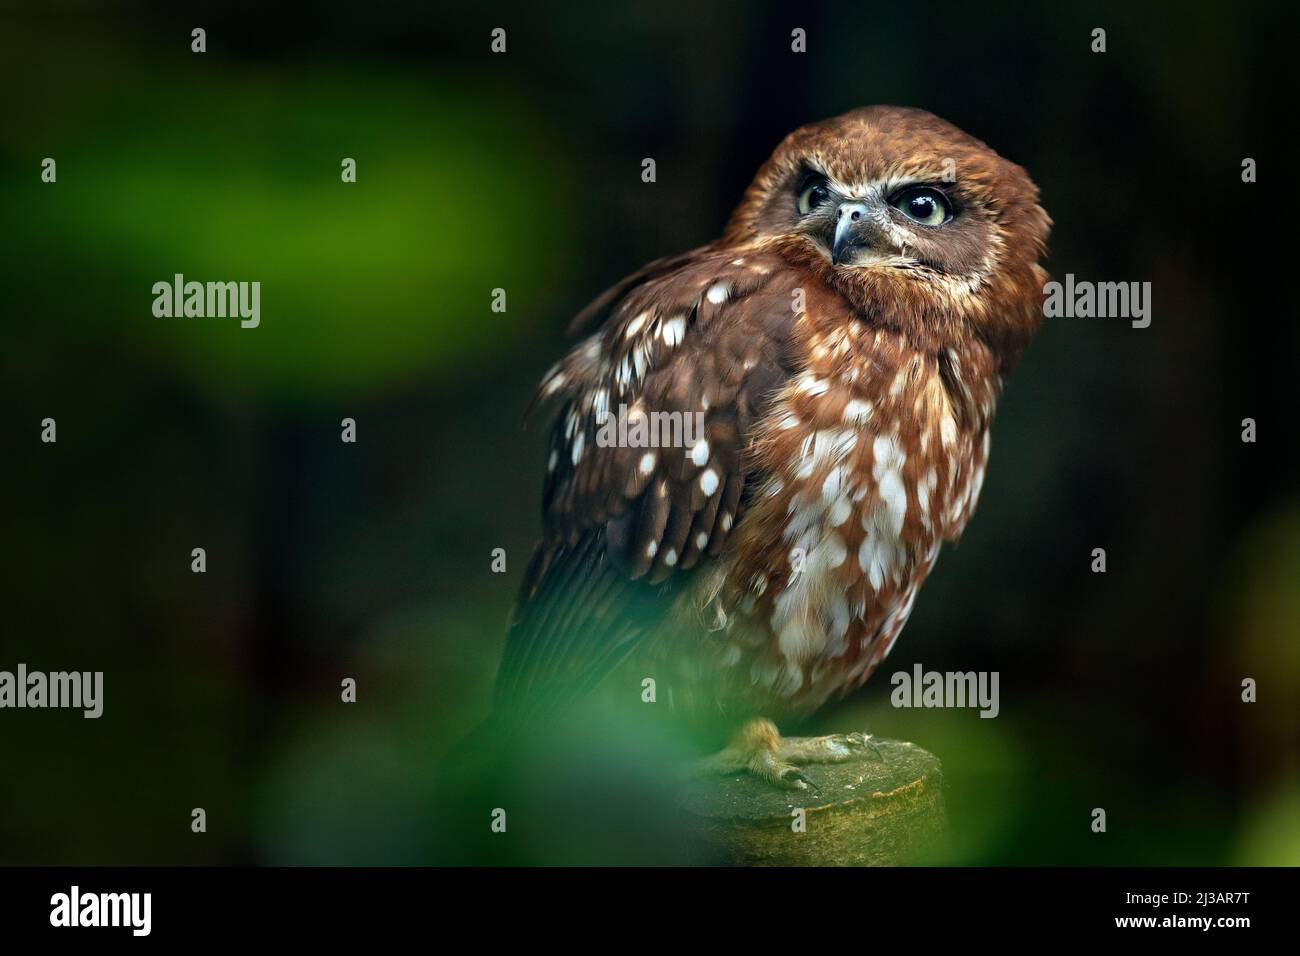 Brown wood owl, Strix leptogrammica, rare bird from Asia. Malaysia beautiful owl in the nature forest habitat. Bird from Malaysia. Fish owl sitting on Stock Photo